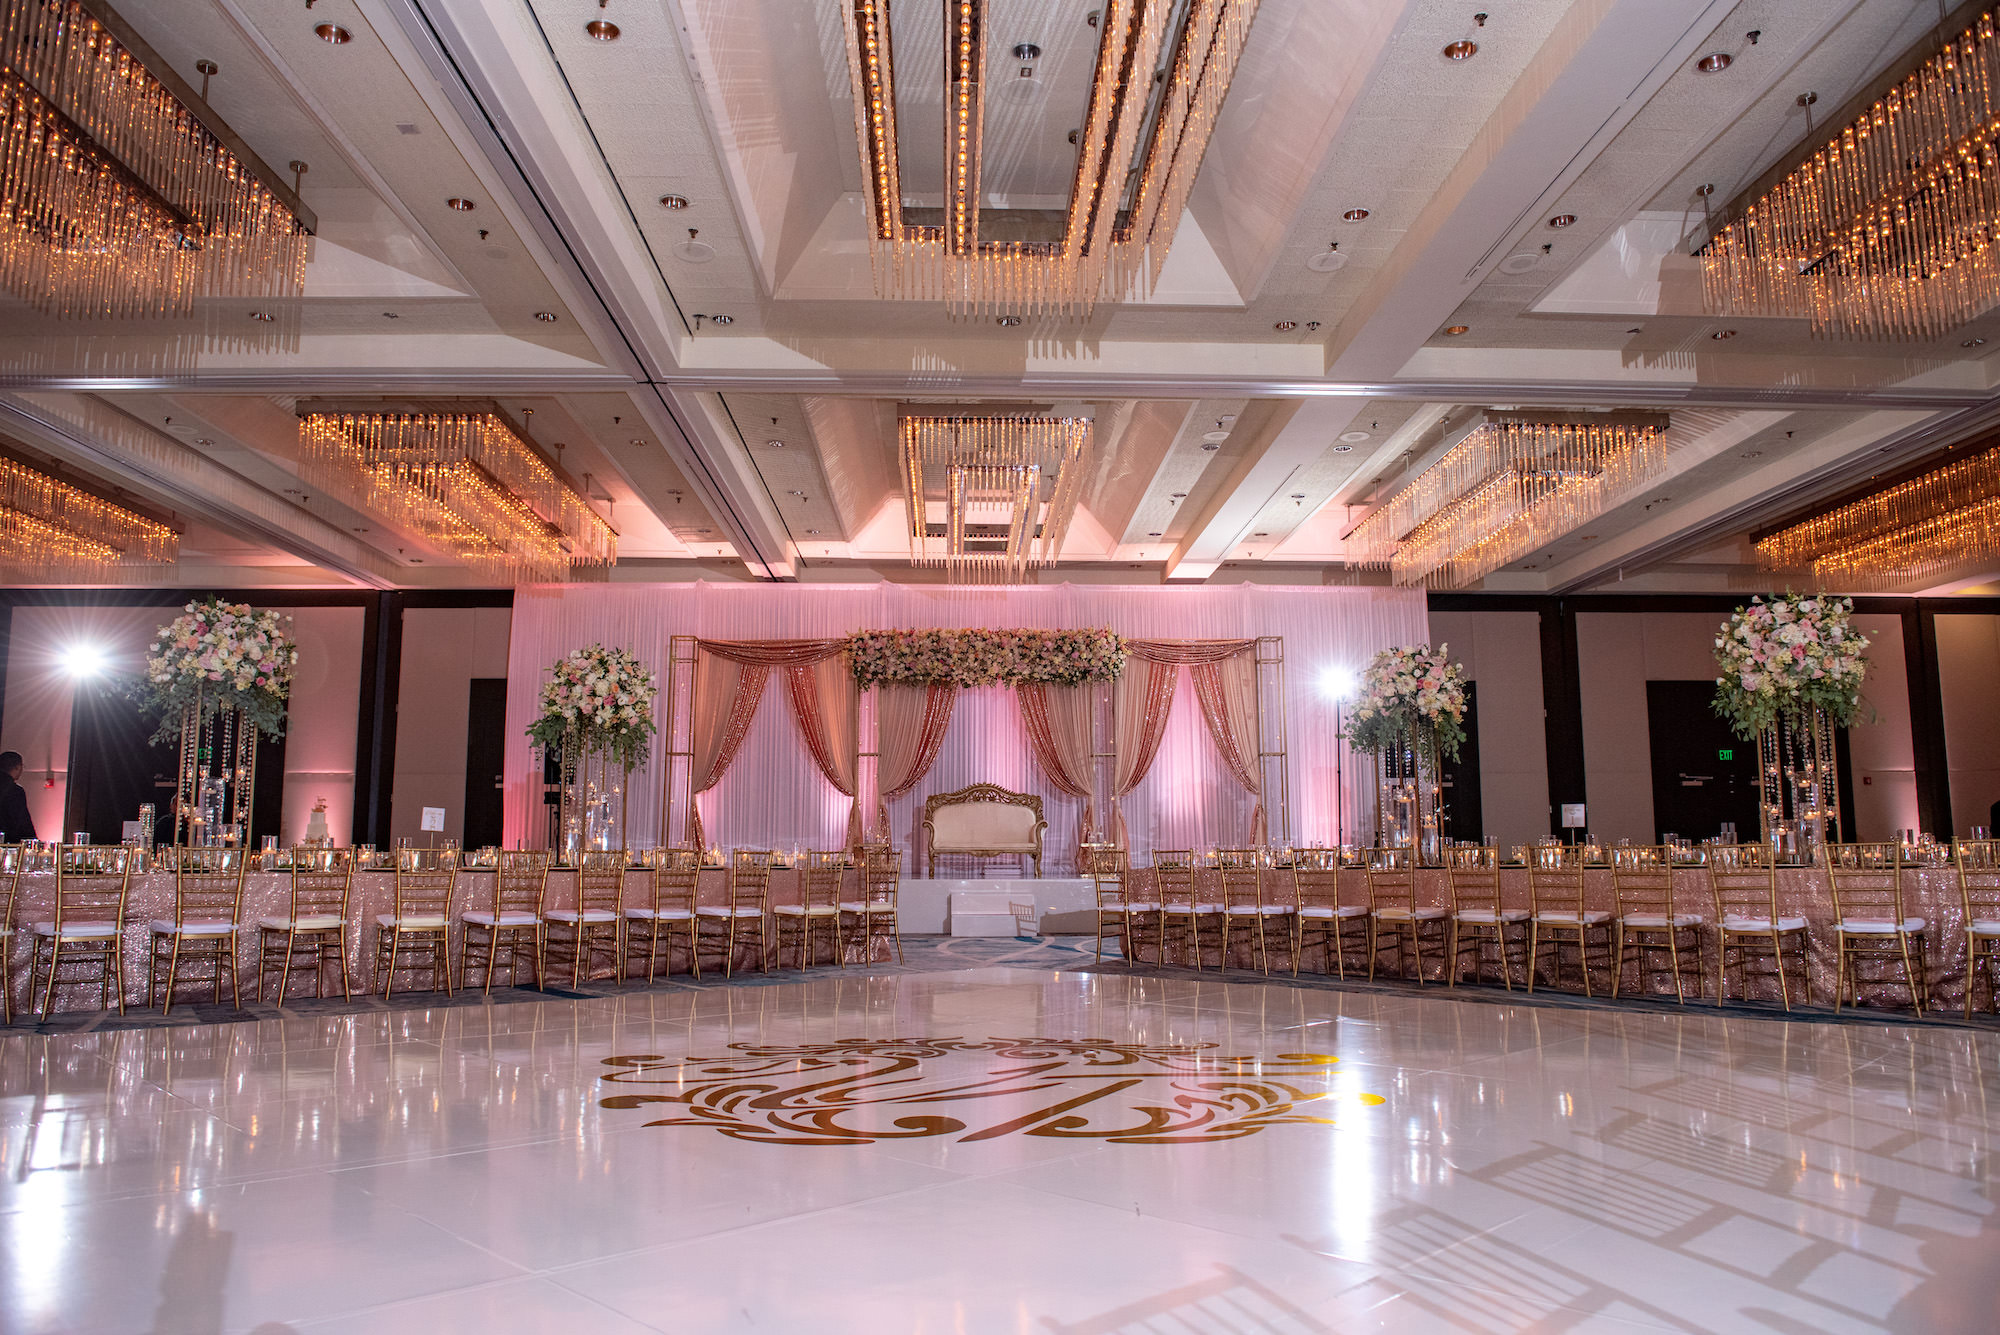 Modern Luxurious Ballroom Wedding Reception, White Dance Floor with Gold Monogram, Rose Gold Linens and Chiavari Chairs, Tall Floral Centerpieces on Long Feasting Tables | Florida Wedding Venue Hilton Downtown Tampa